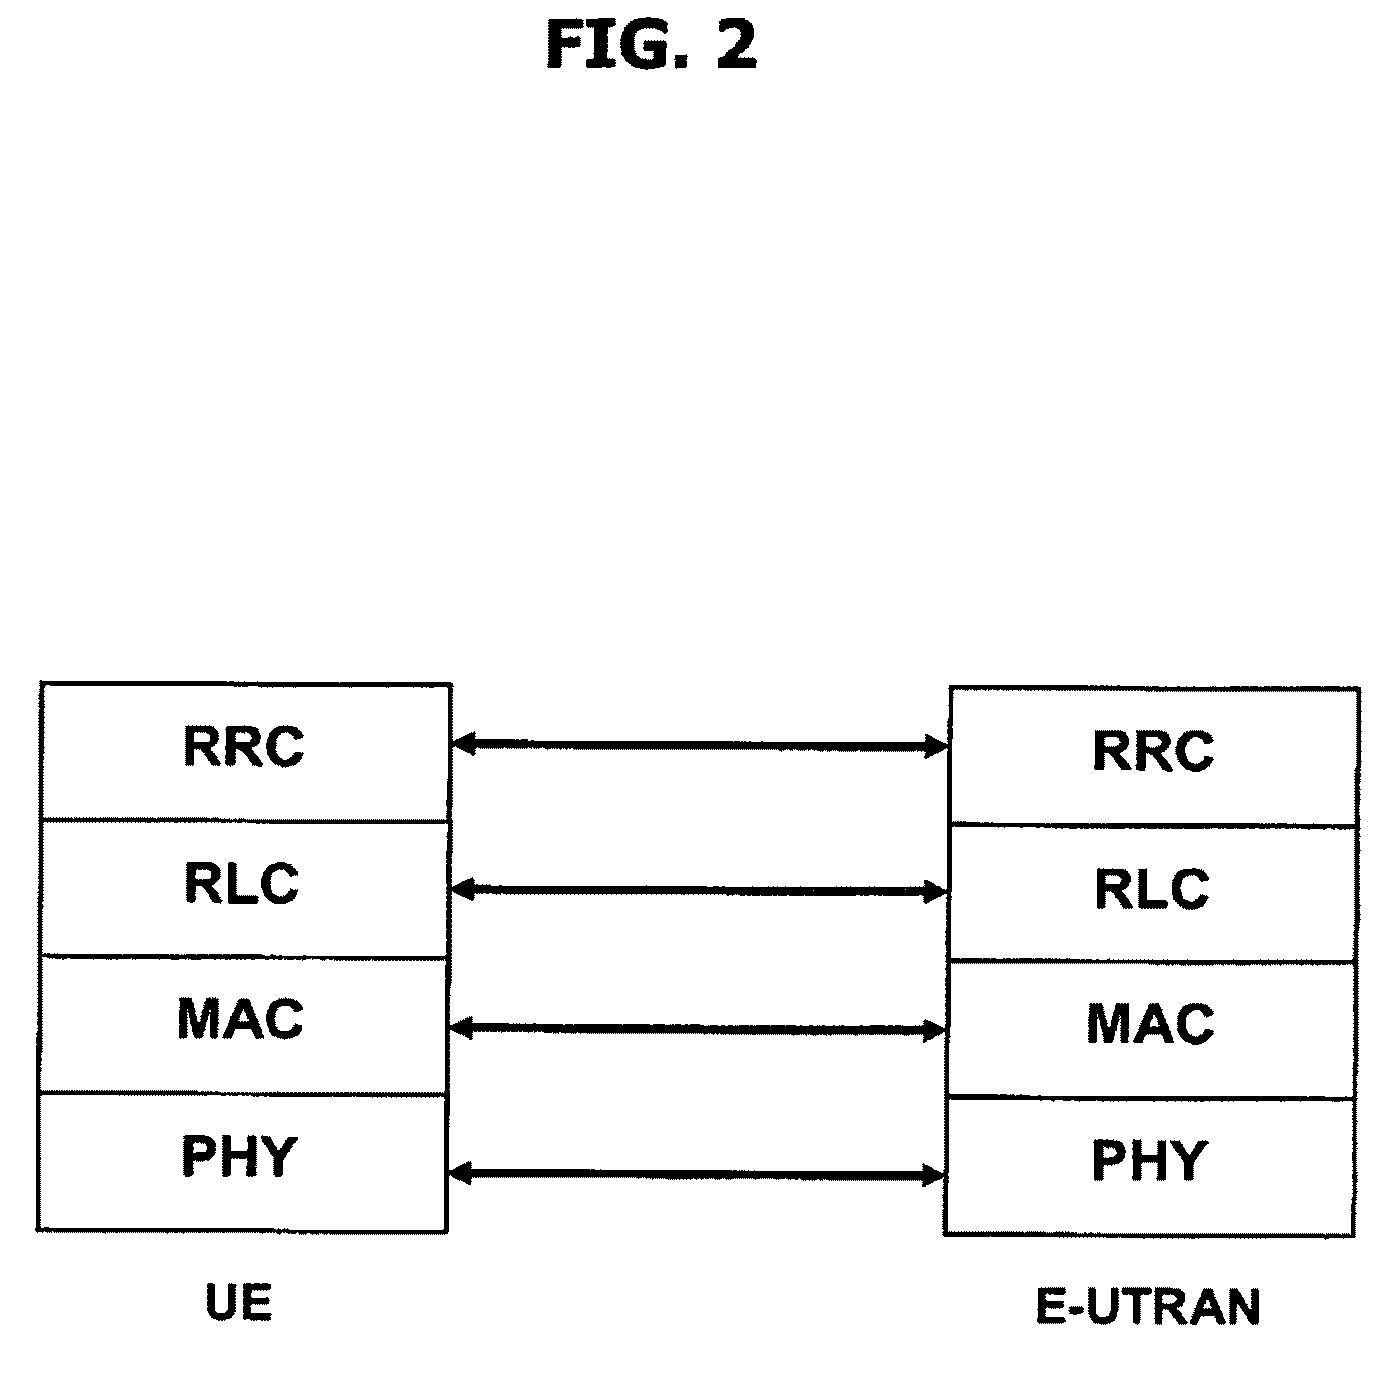 Method of delivering a PDCP data unit to an upper layer